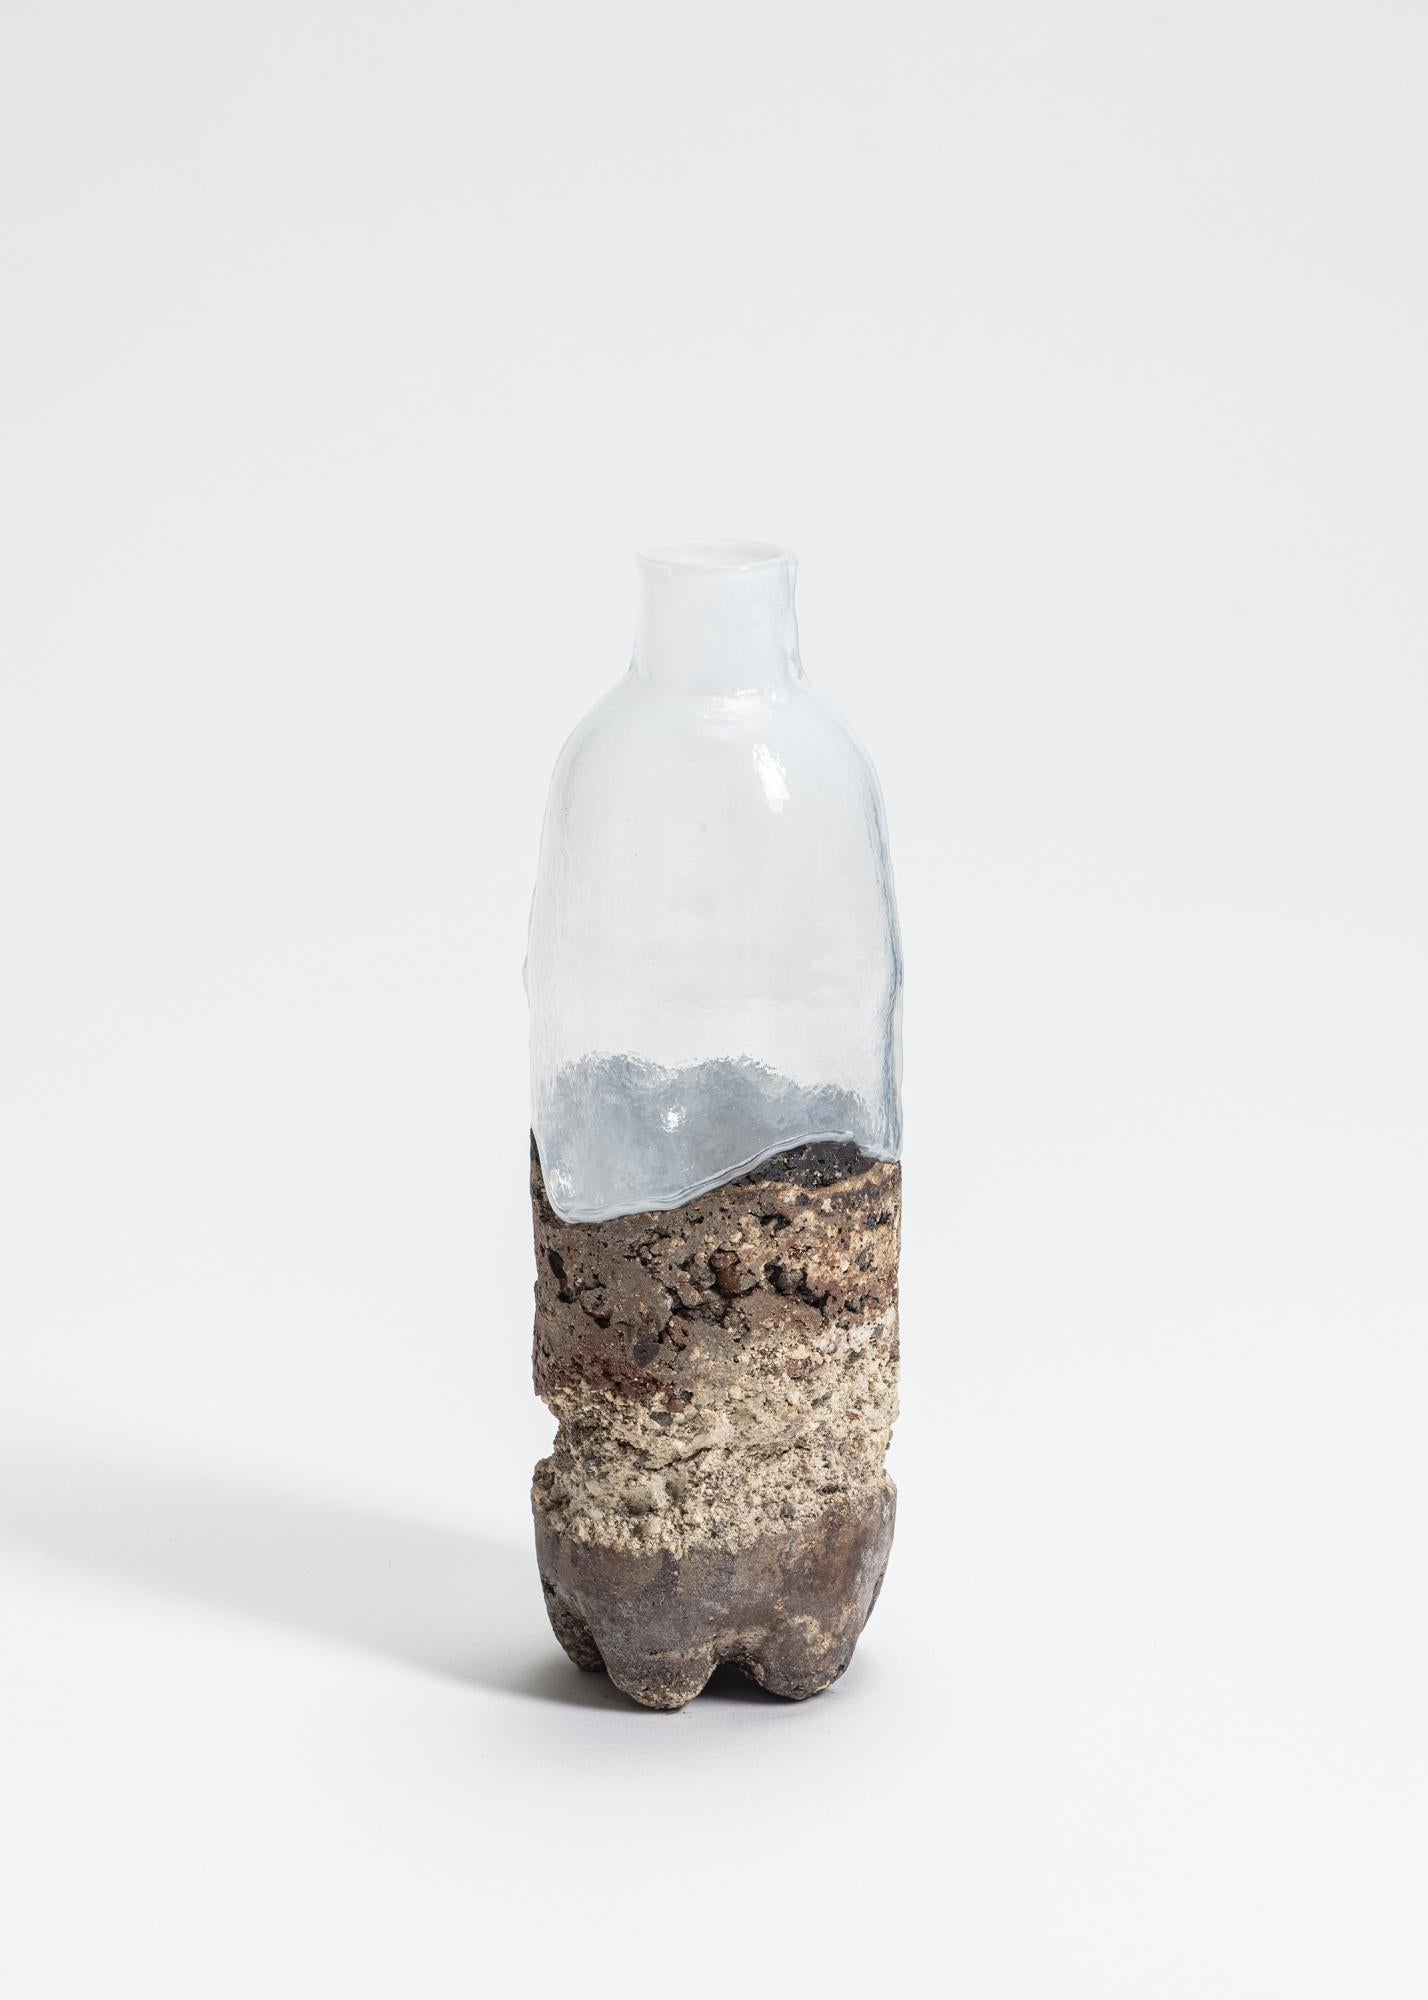 FUWA FUWA, No 10 bottle by Yusuke´ Y. Offhause
One of a Kind, the work is in two parts (ceramic and glass).
Dimensions: D 7.5 x W 7.5 x H 23.5 cm.
Materials: stoneware, porcelain, glass.

Yusuke´ Y. Offhause:
